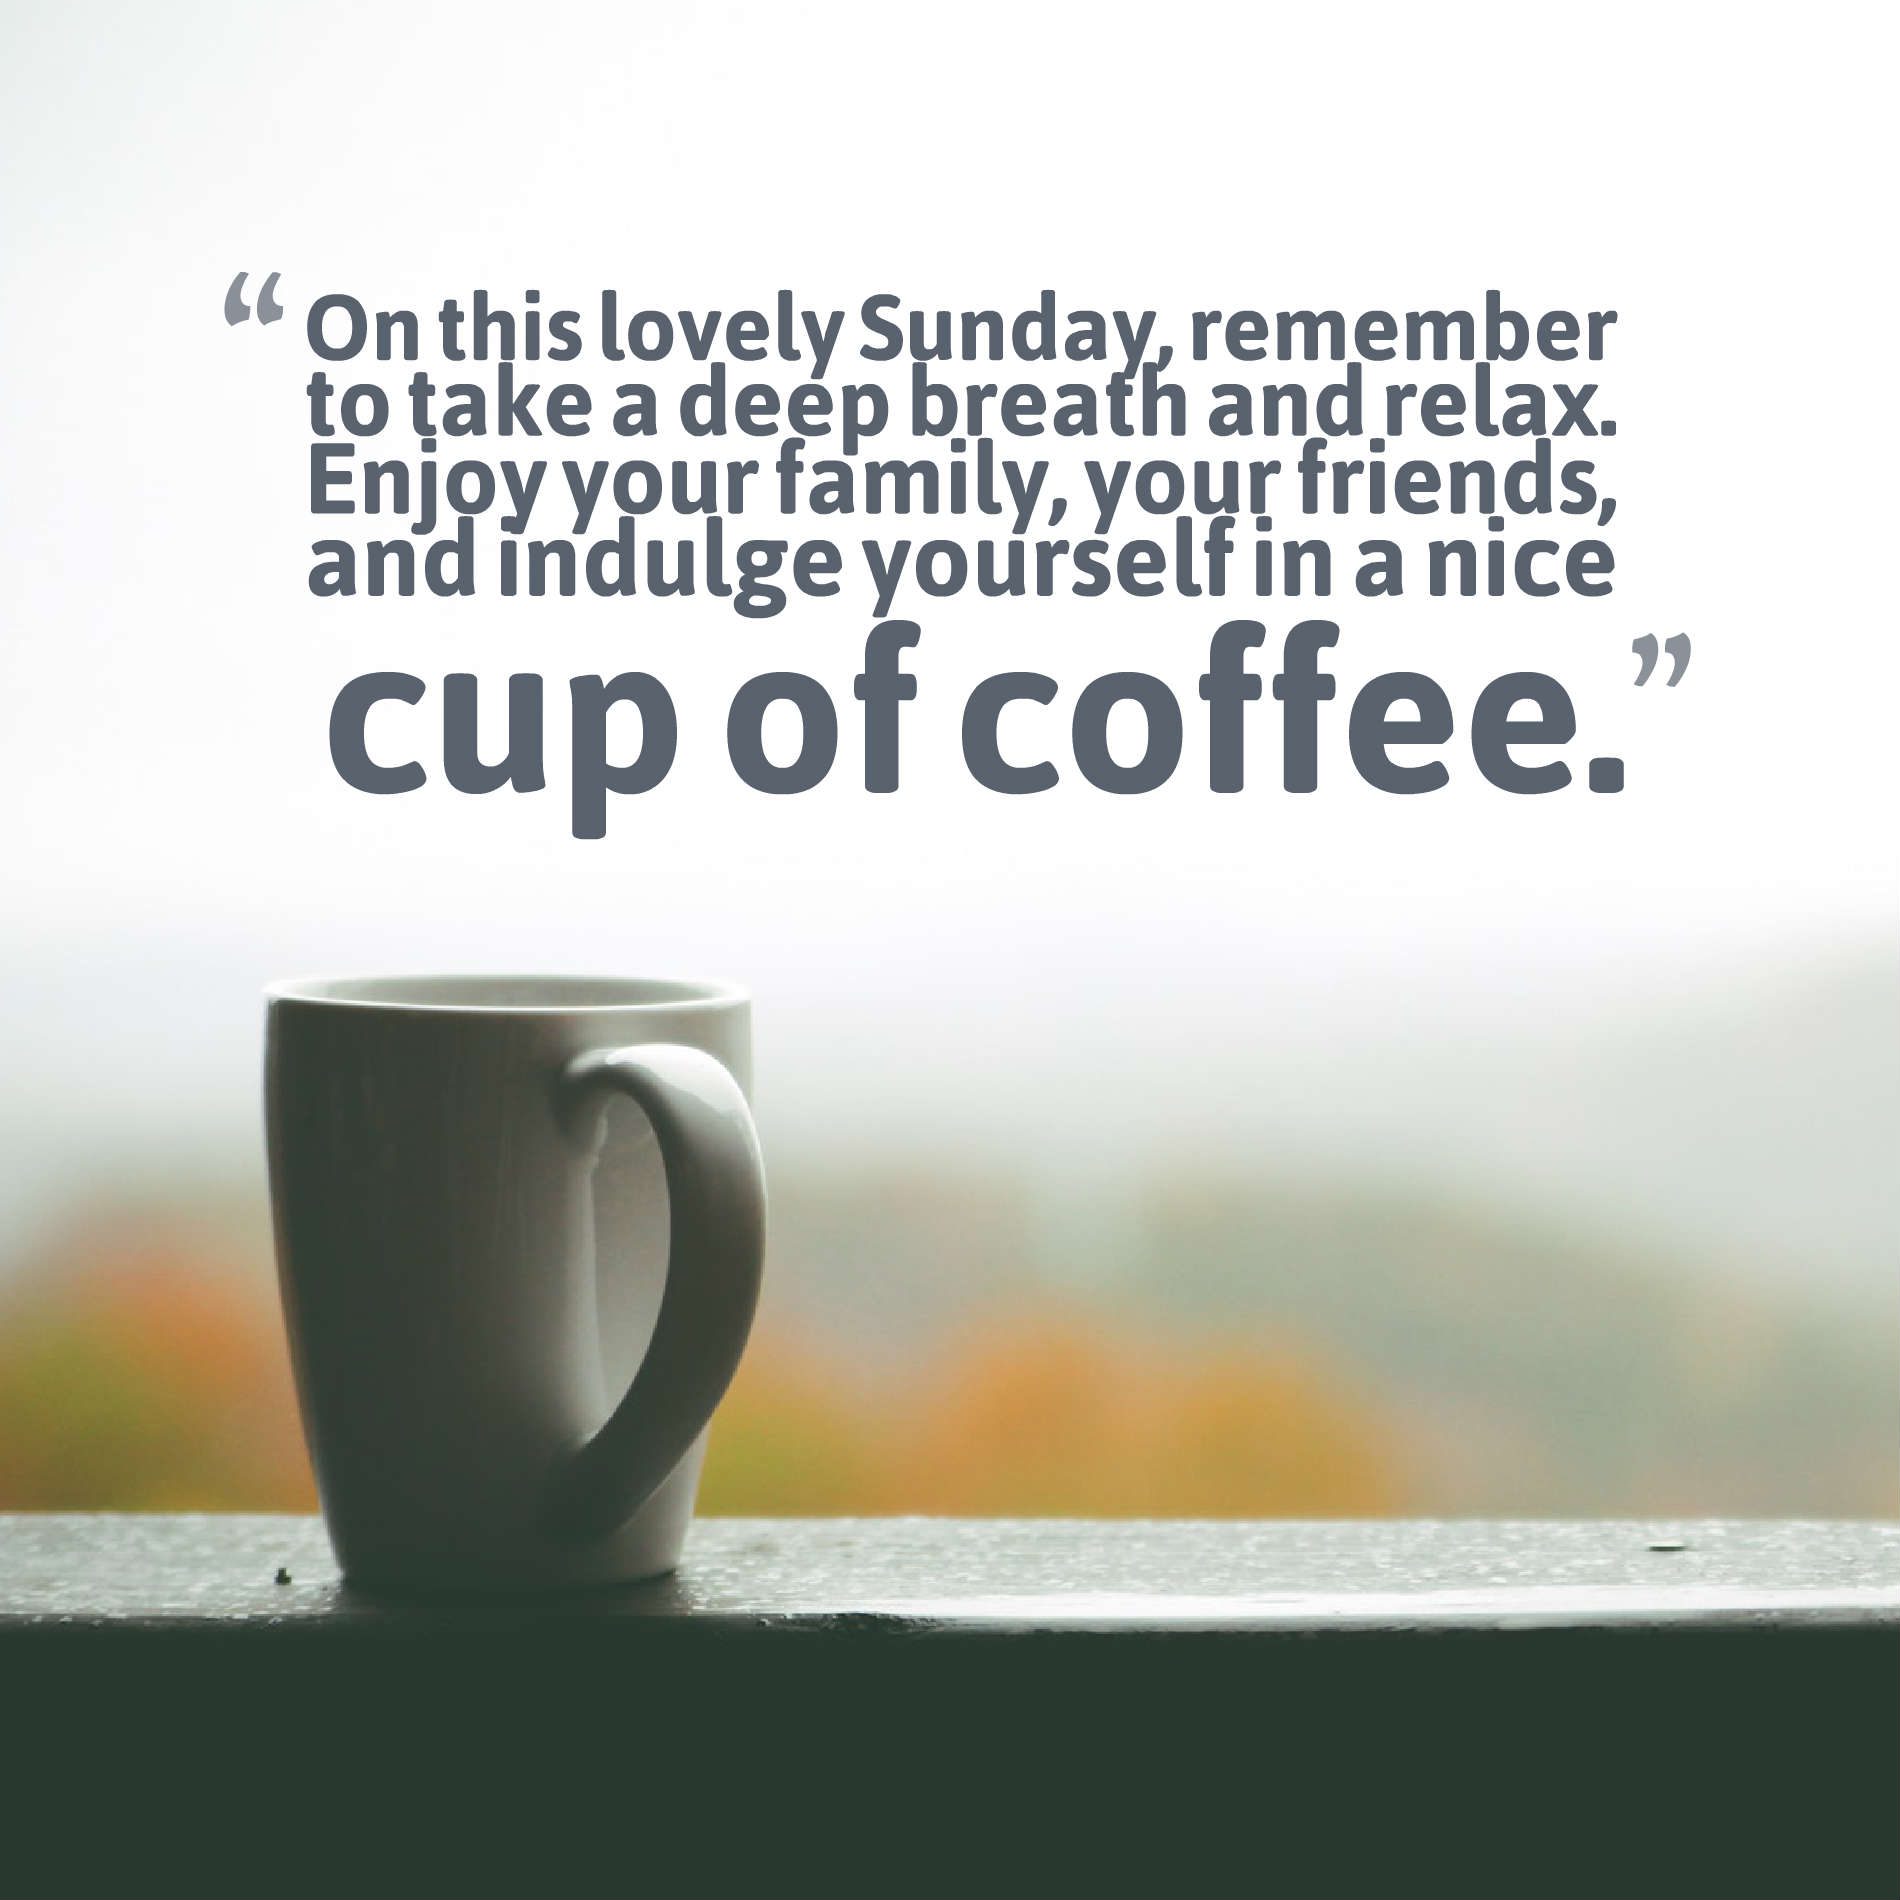 On this lovely Sunday, remember to take a deep breath and relax. Enjoy your family, your friends, and indulge yourself in a nice cup of coffee.